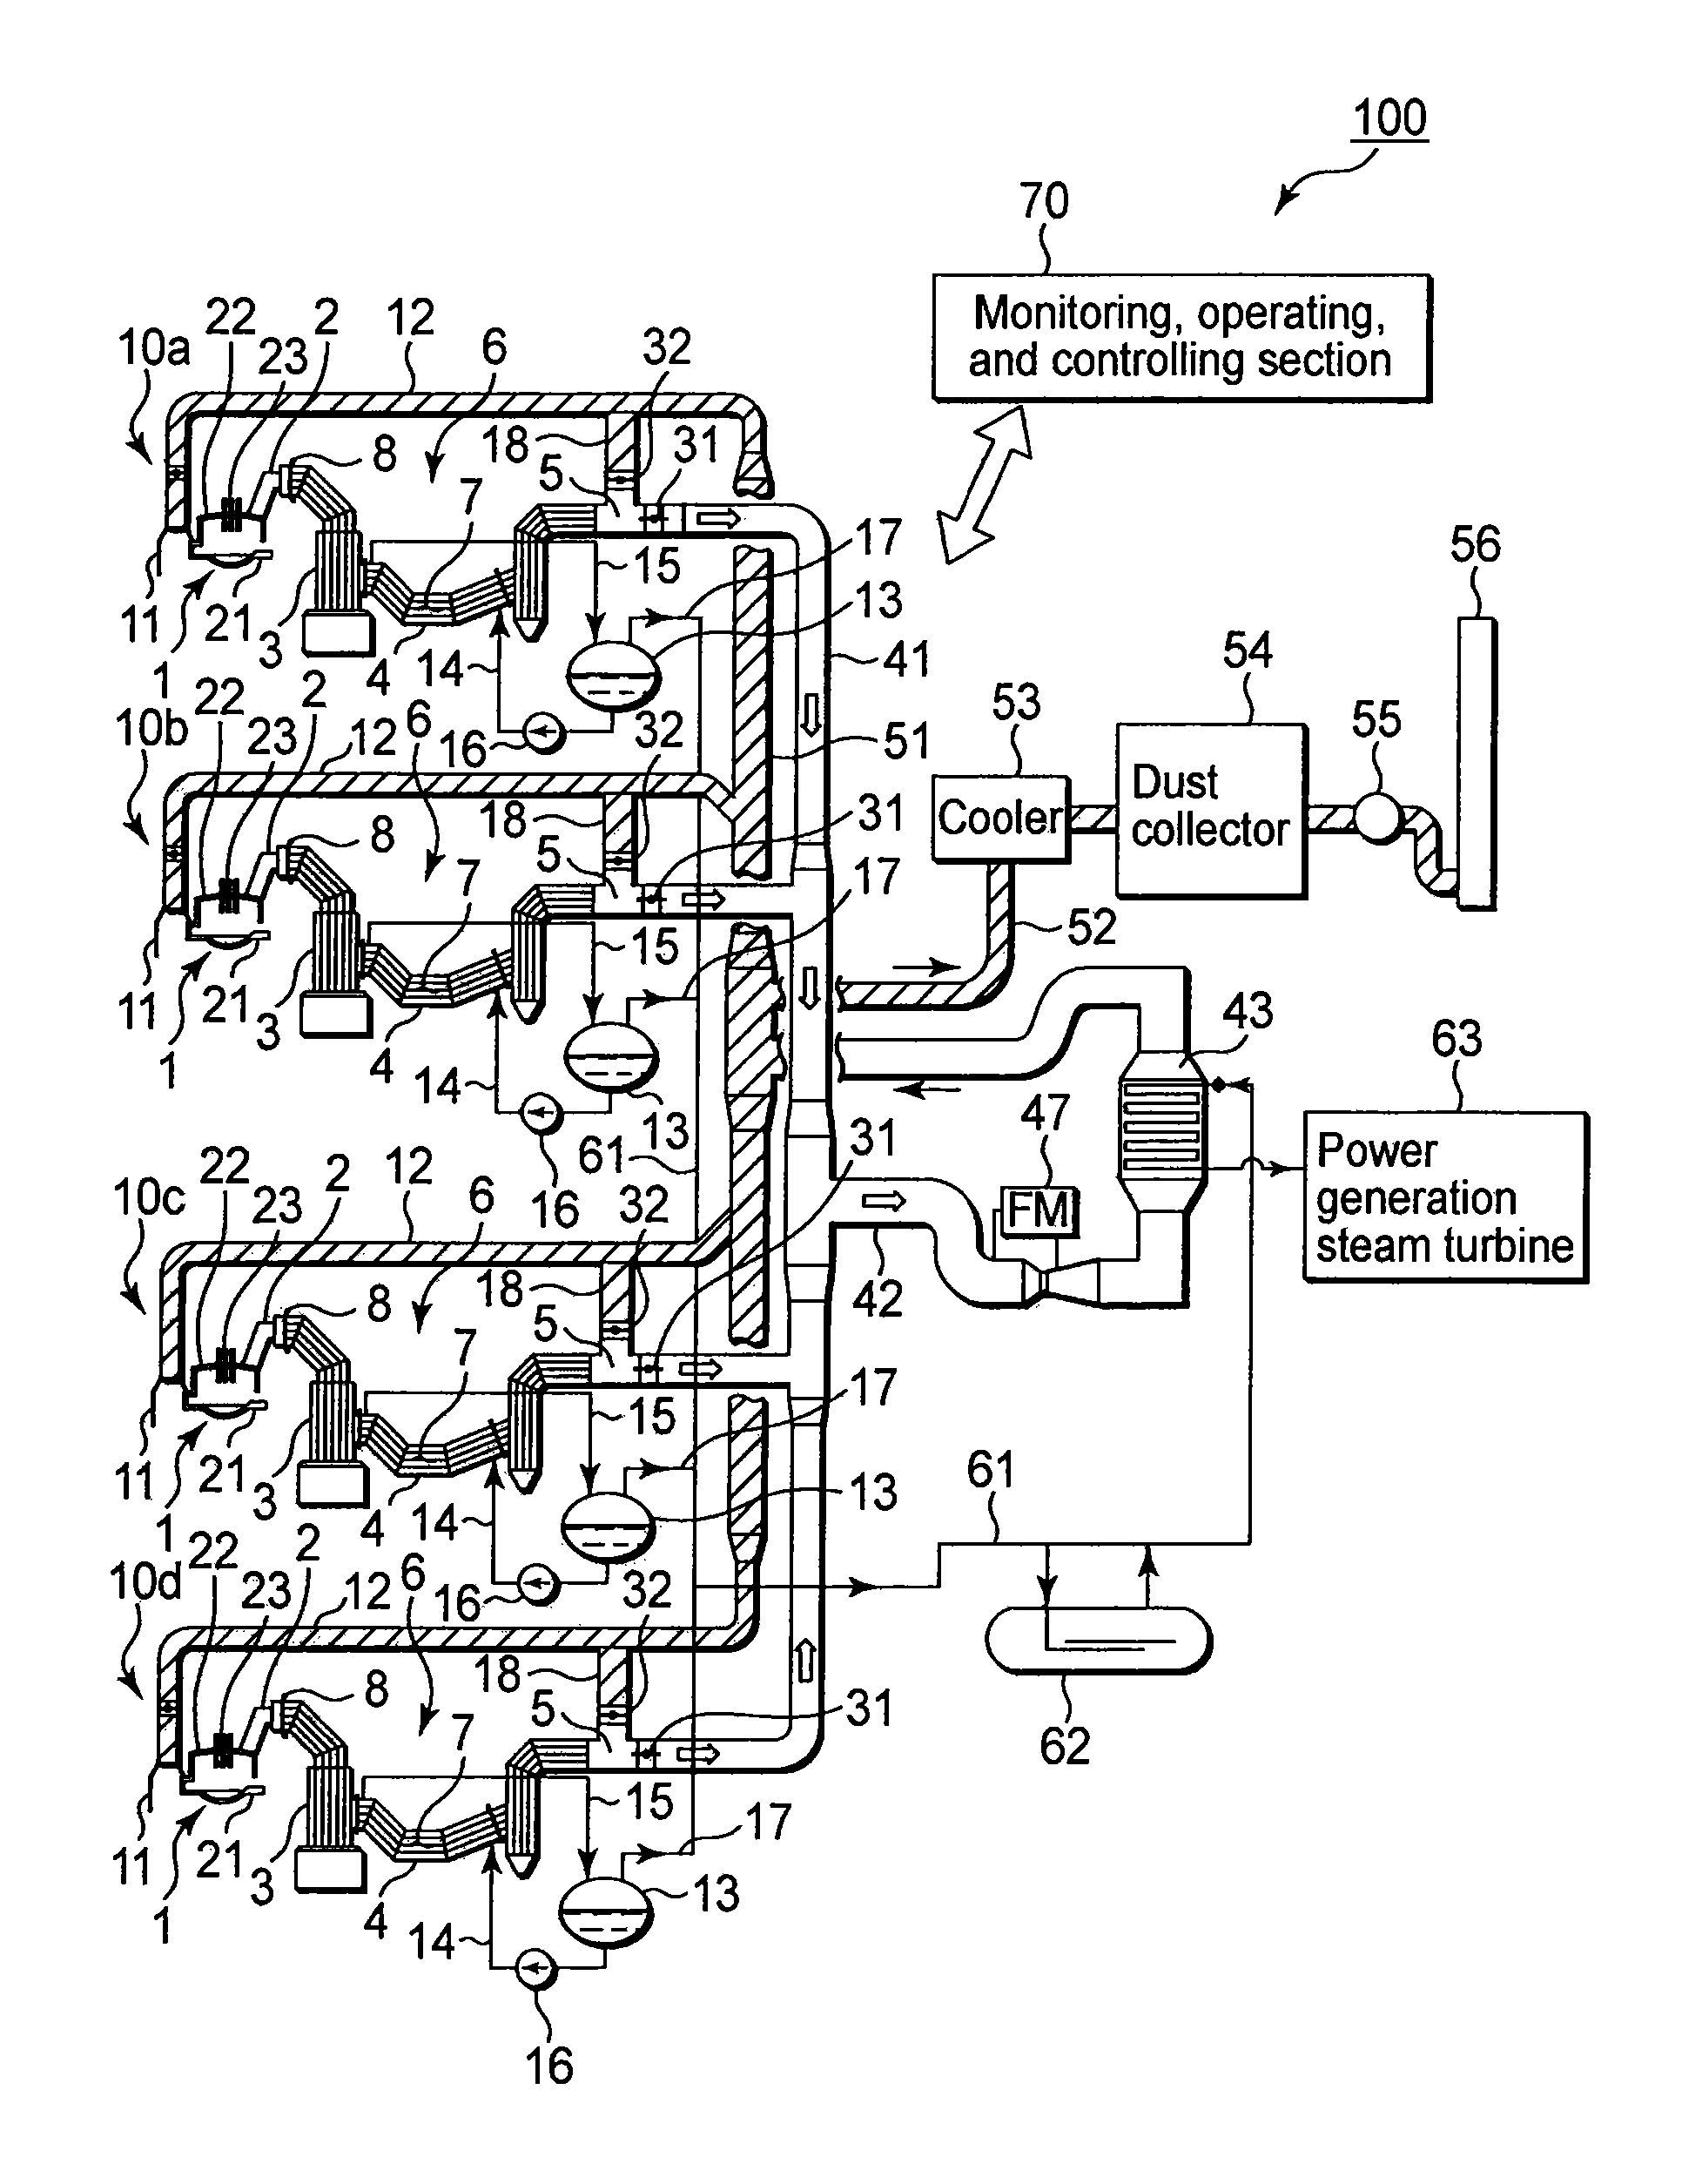 Waste heat recovery structure for steel making electric arc furnaces, steel making electric arc furnace facility, and waste heat recovery method for steel making electric arc furnaces